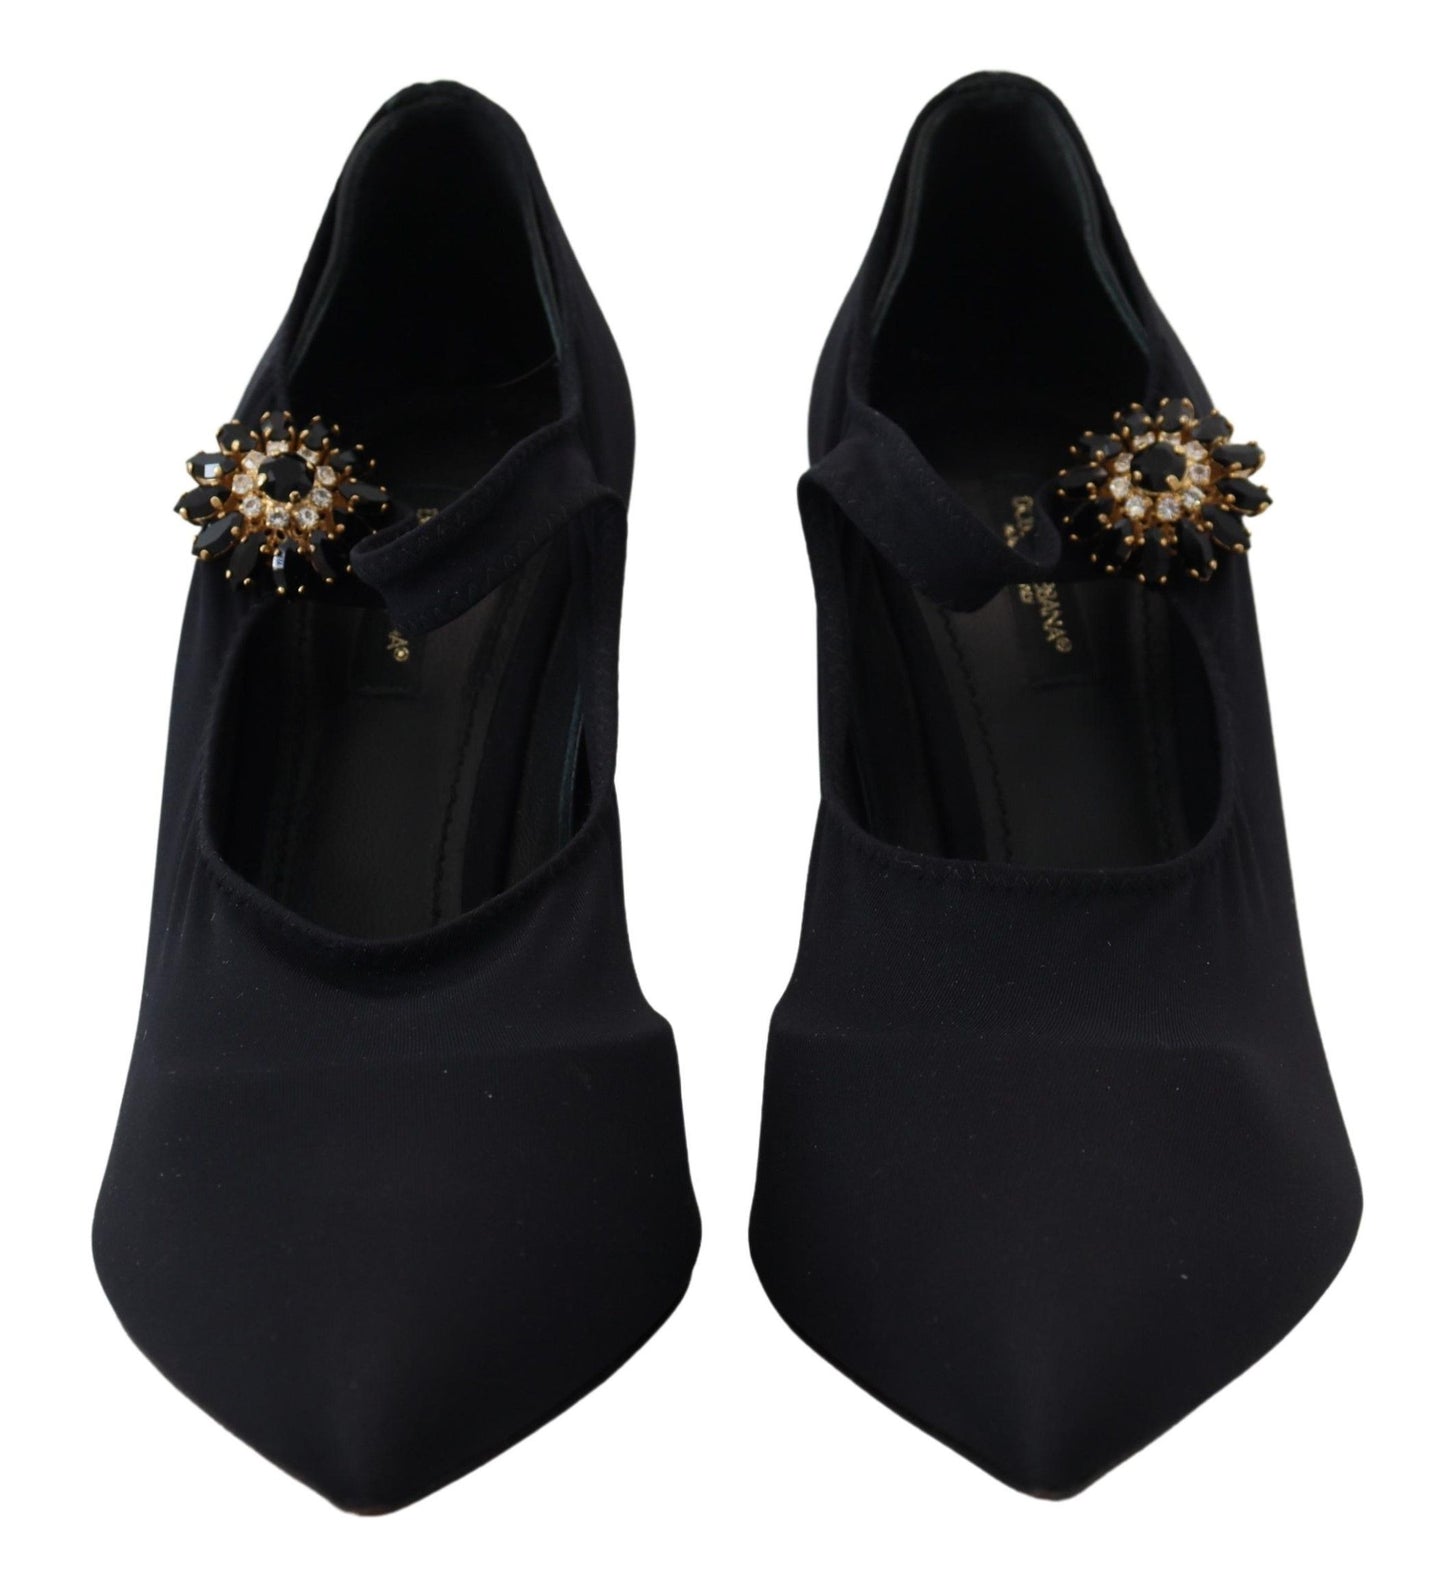 Chic Black Mary Jane Sock Pumps with Crystals